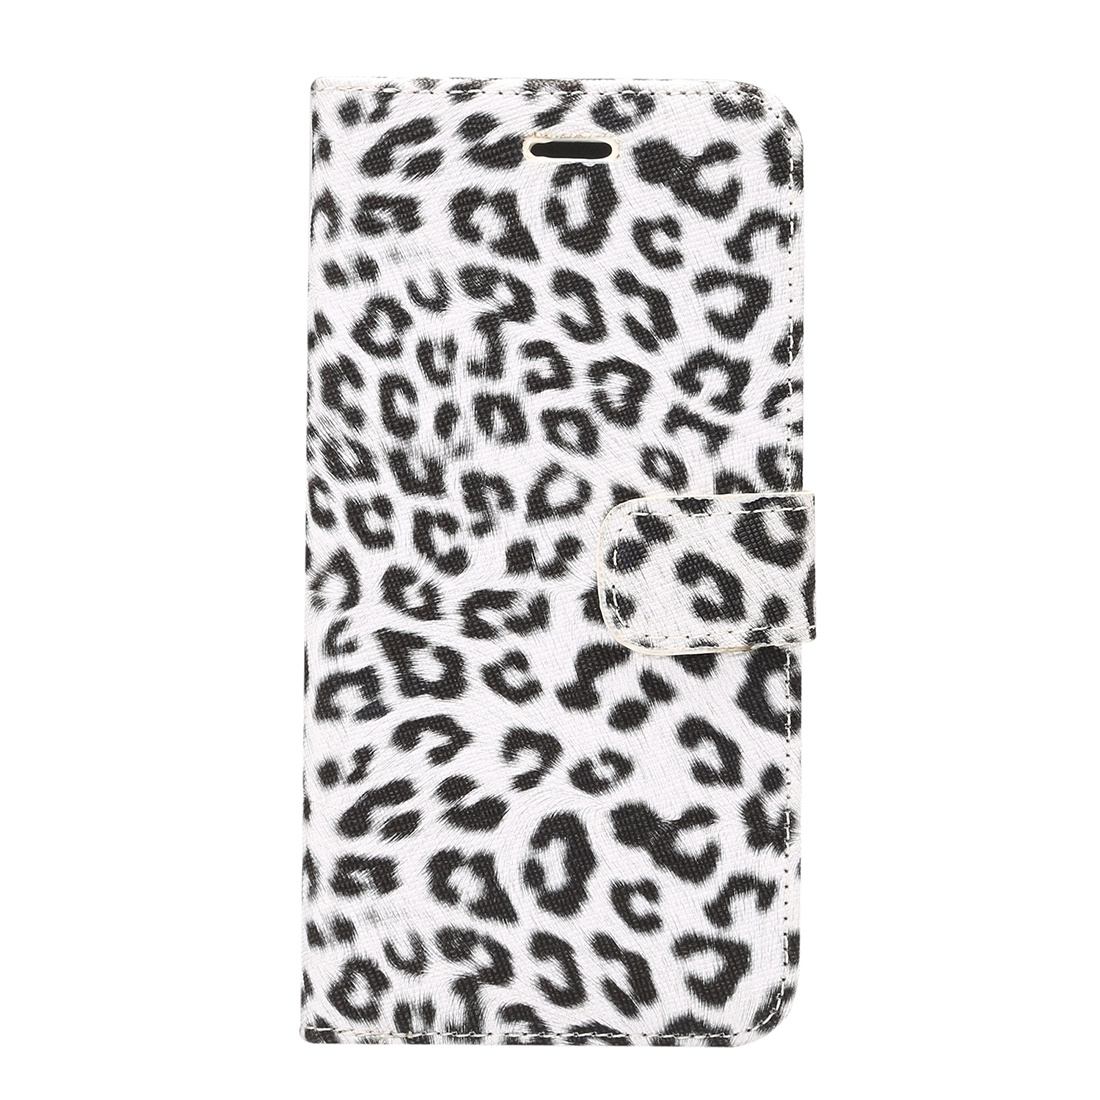 For Samsung Galaxy S9 PLUS Wallet Case, Leopard Pattern Leather Cover,White